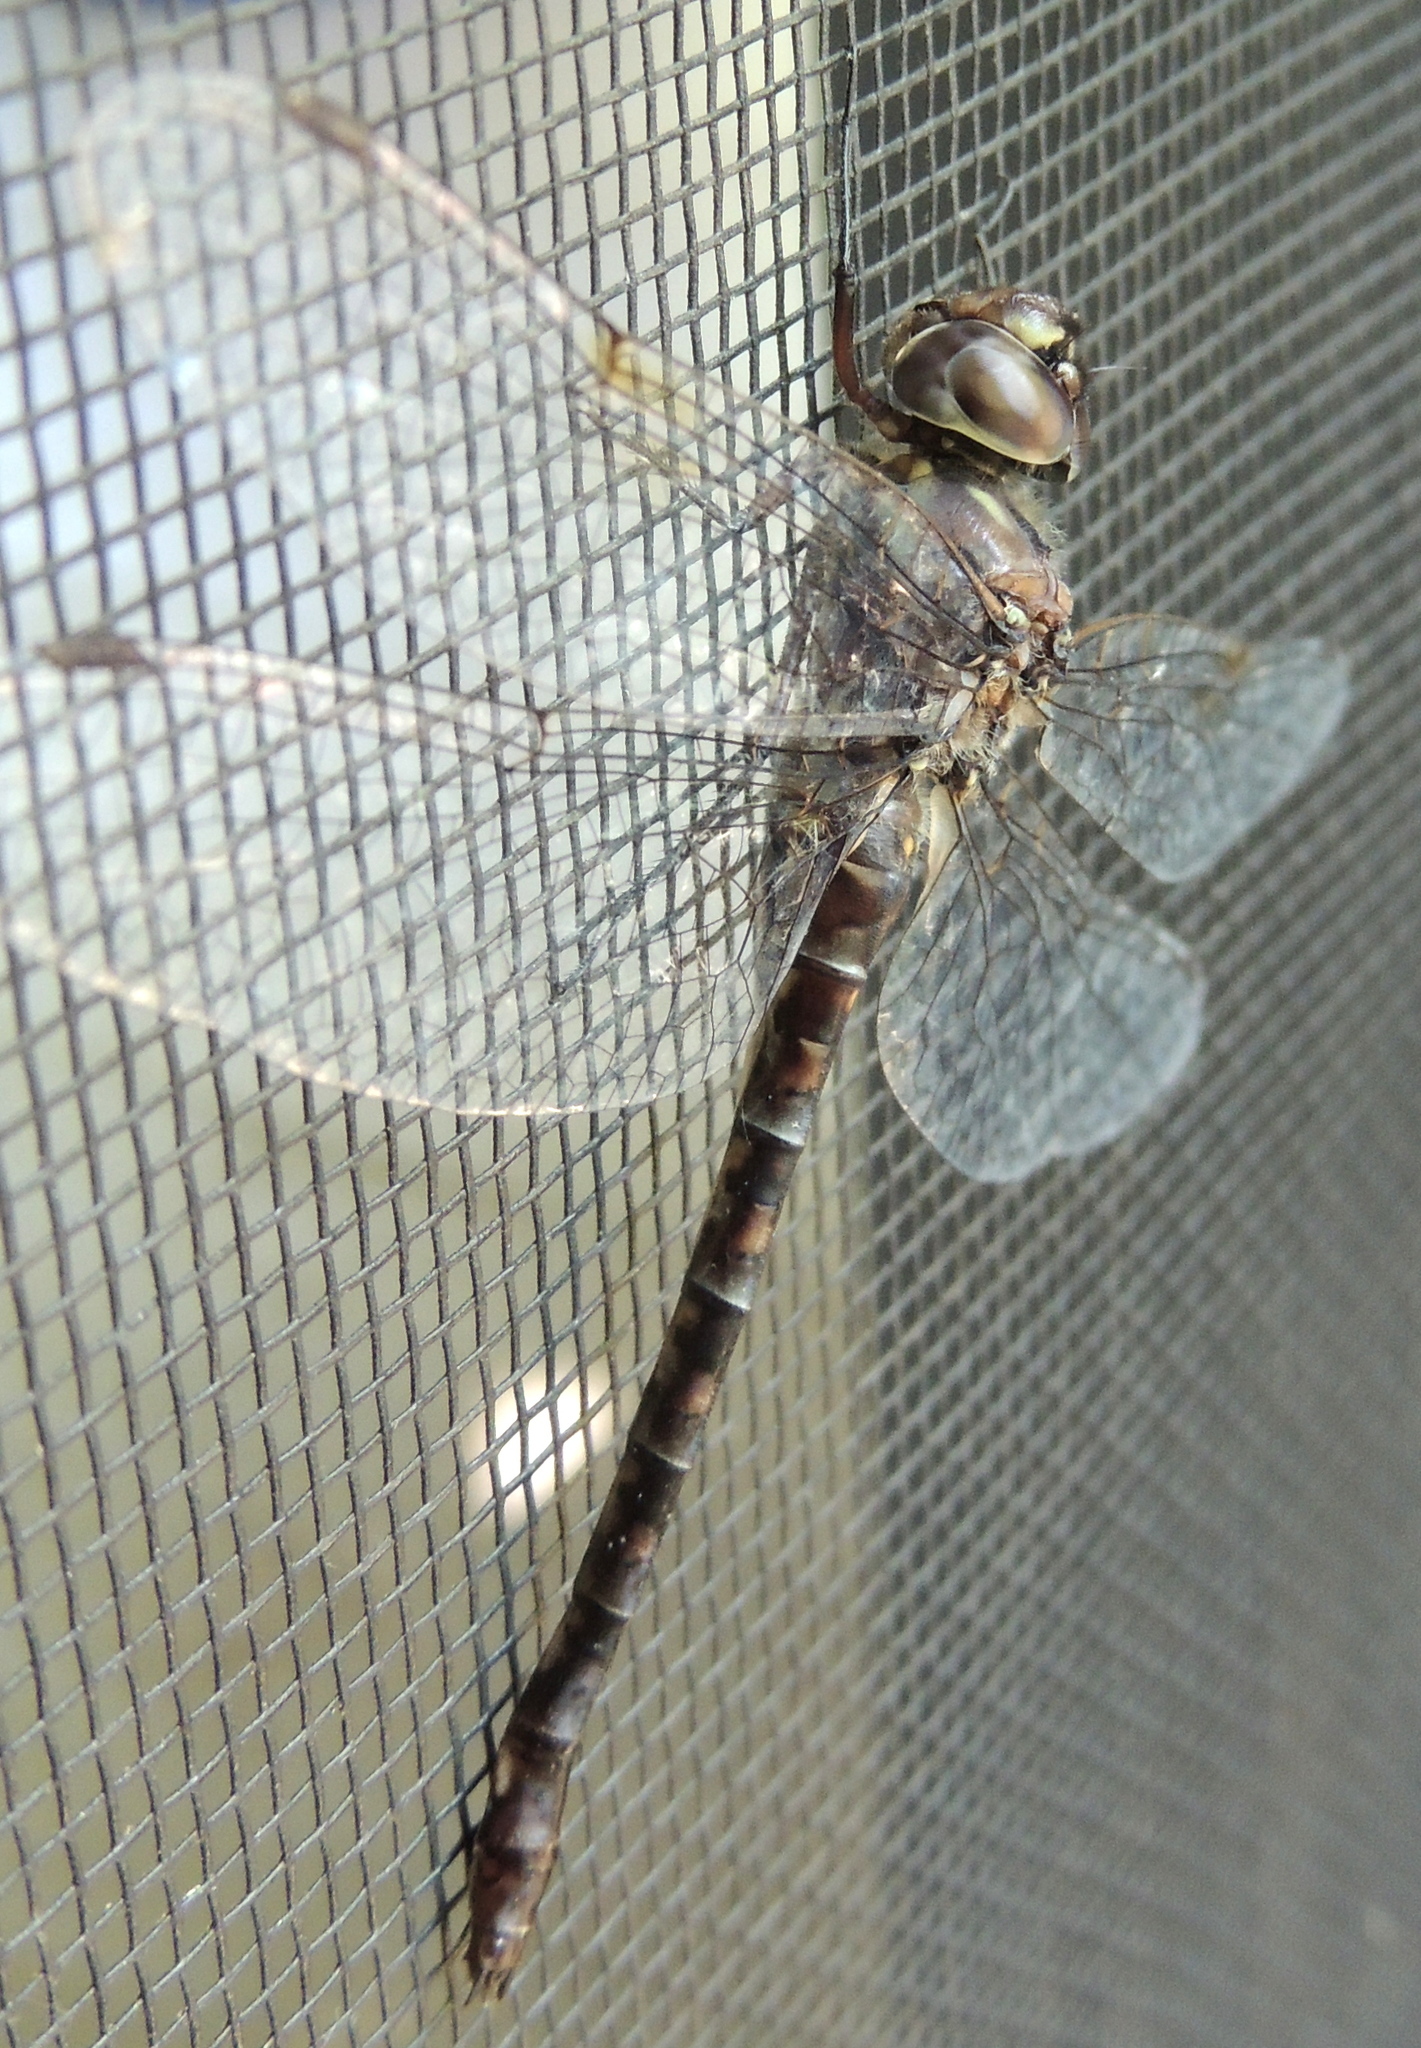 Image of Taper-tailed Darner